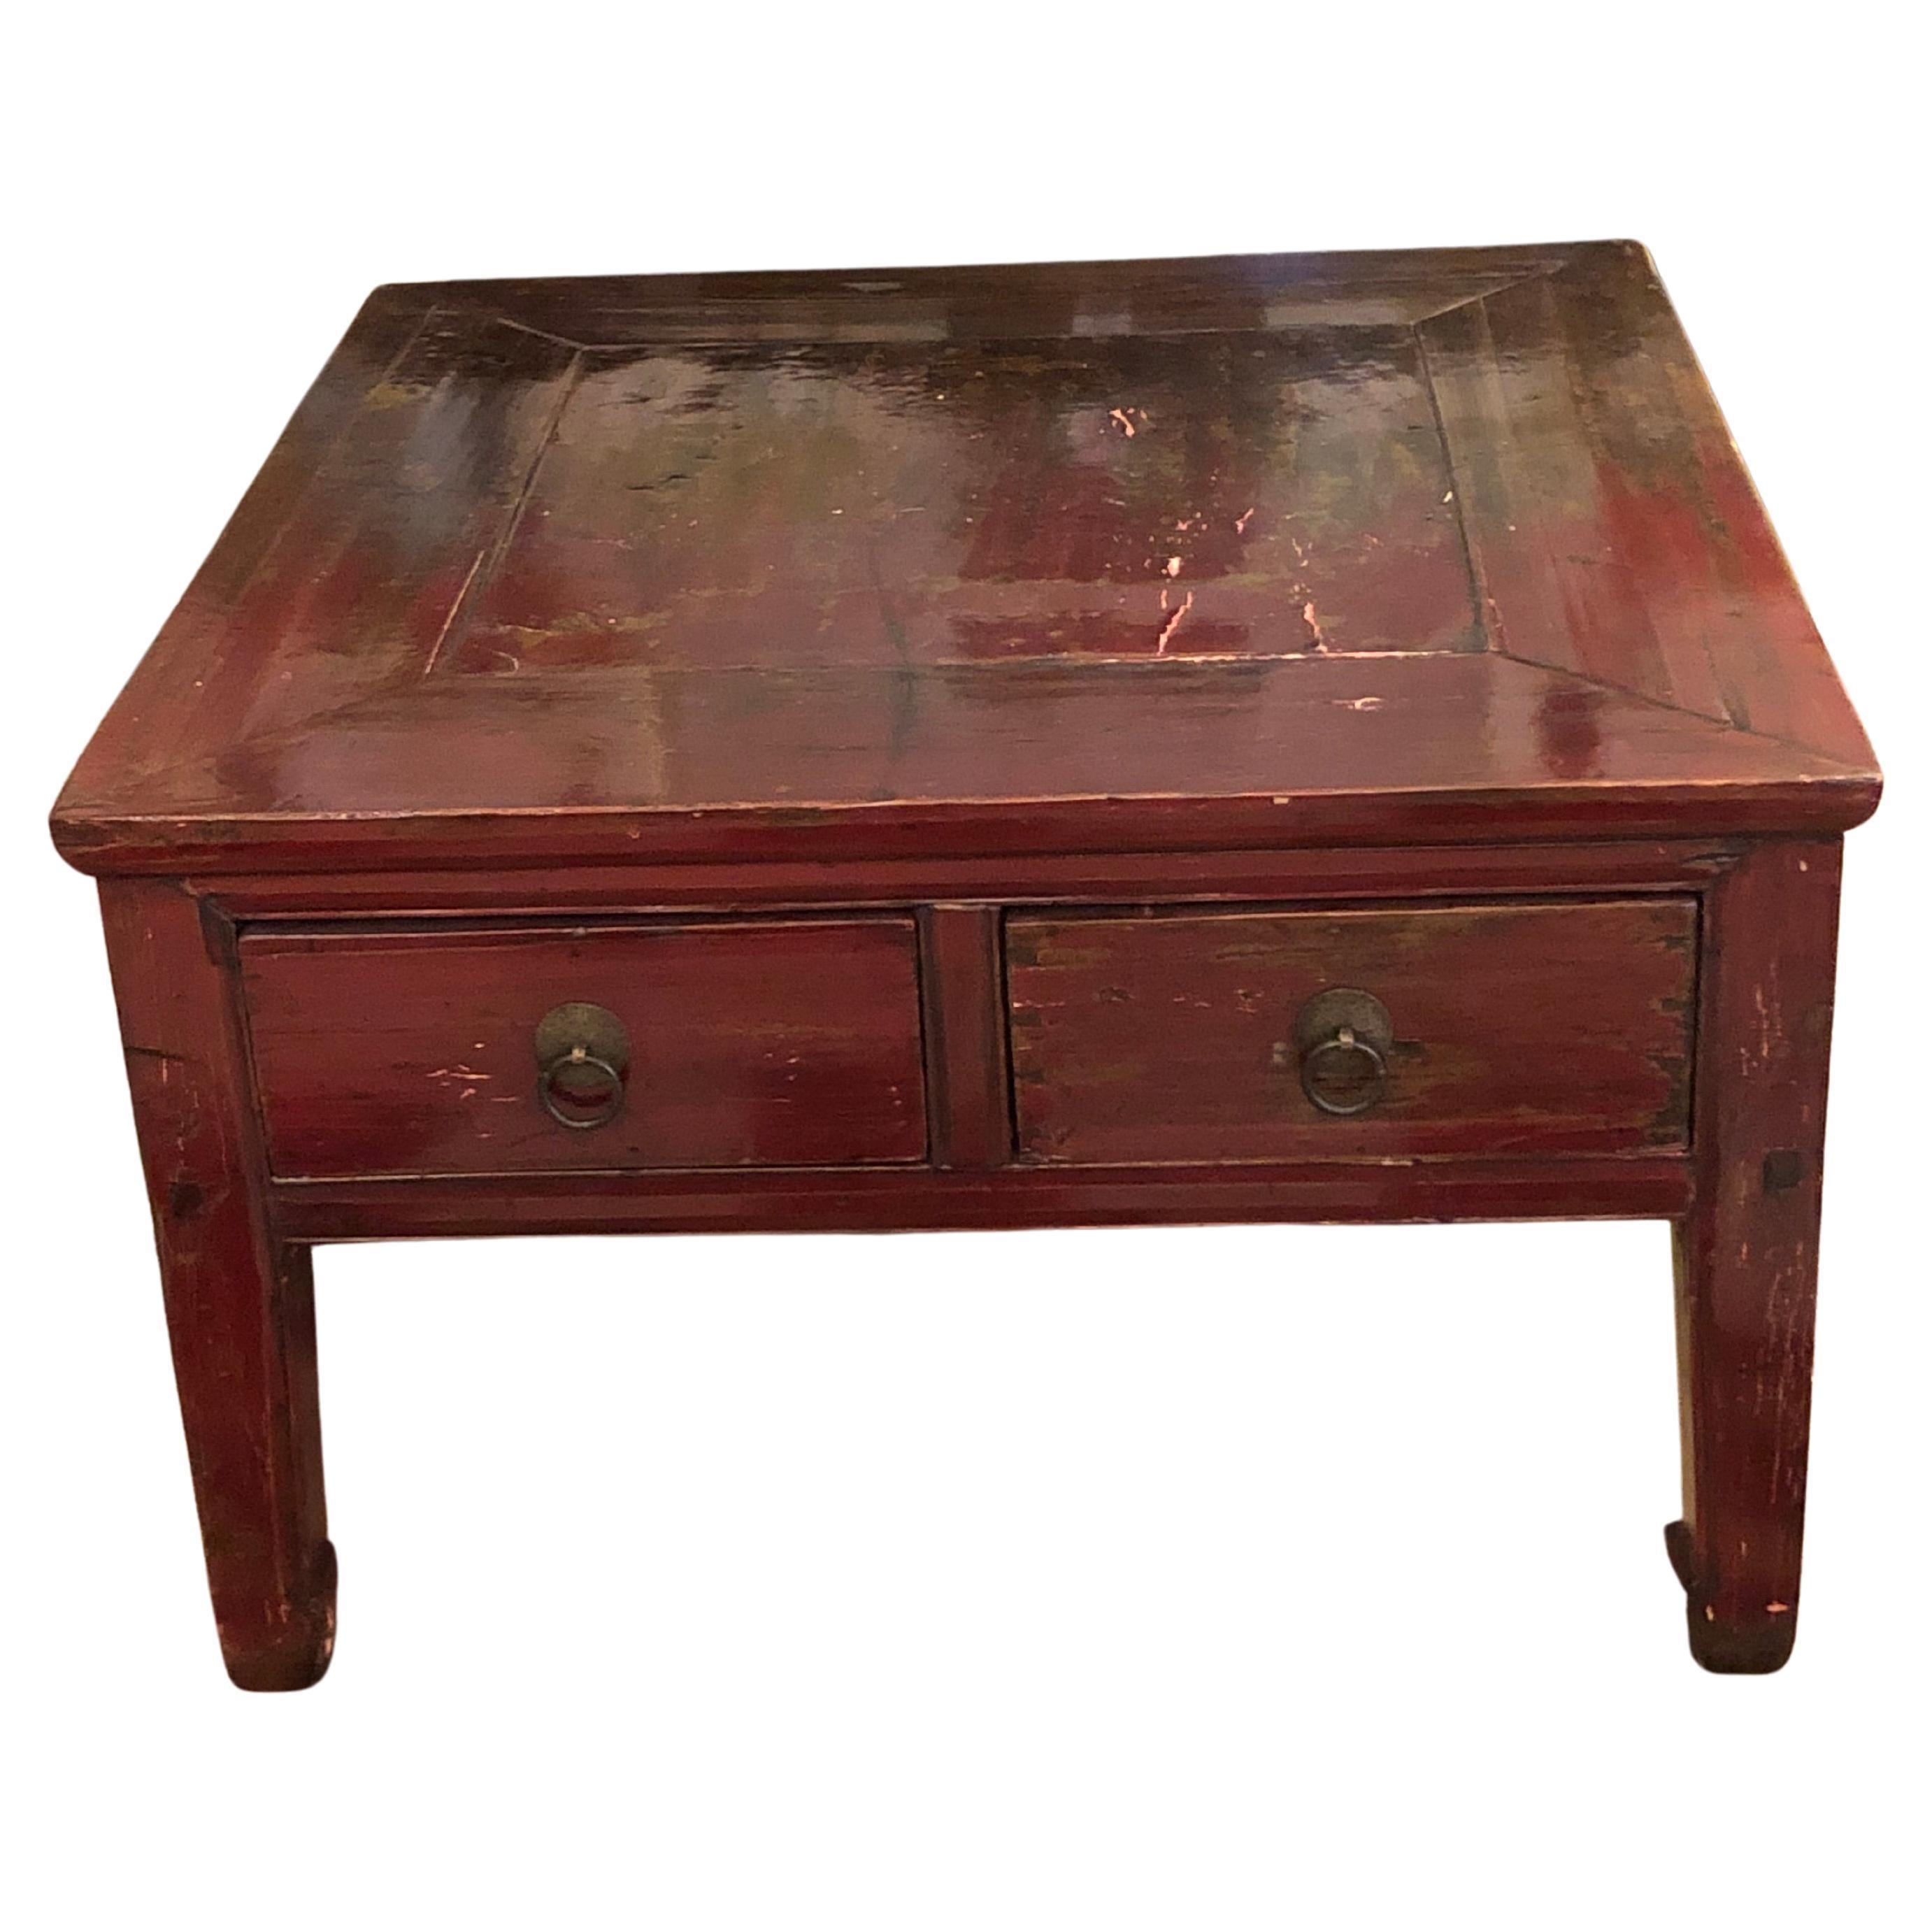 Character Rich Deep Red Distressed Square Wooden Asian Coffee Table